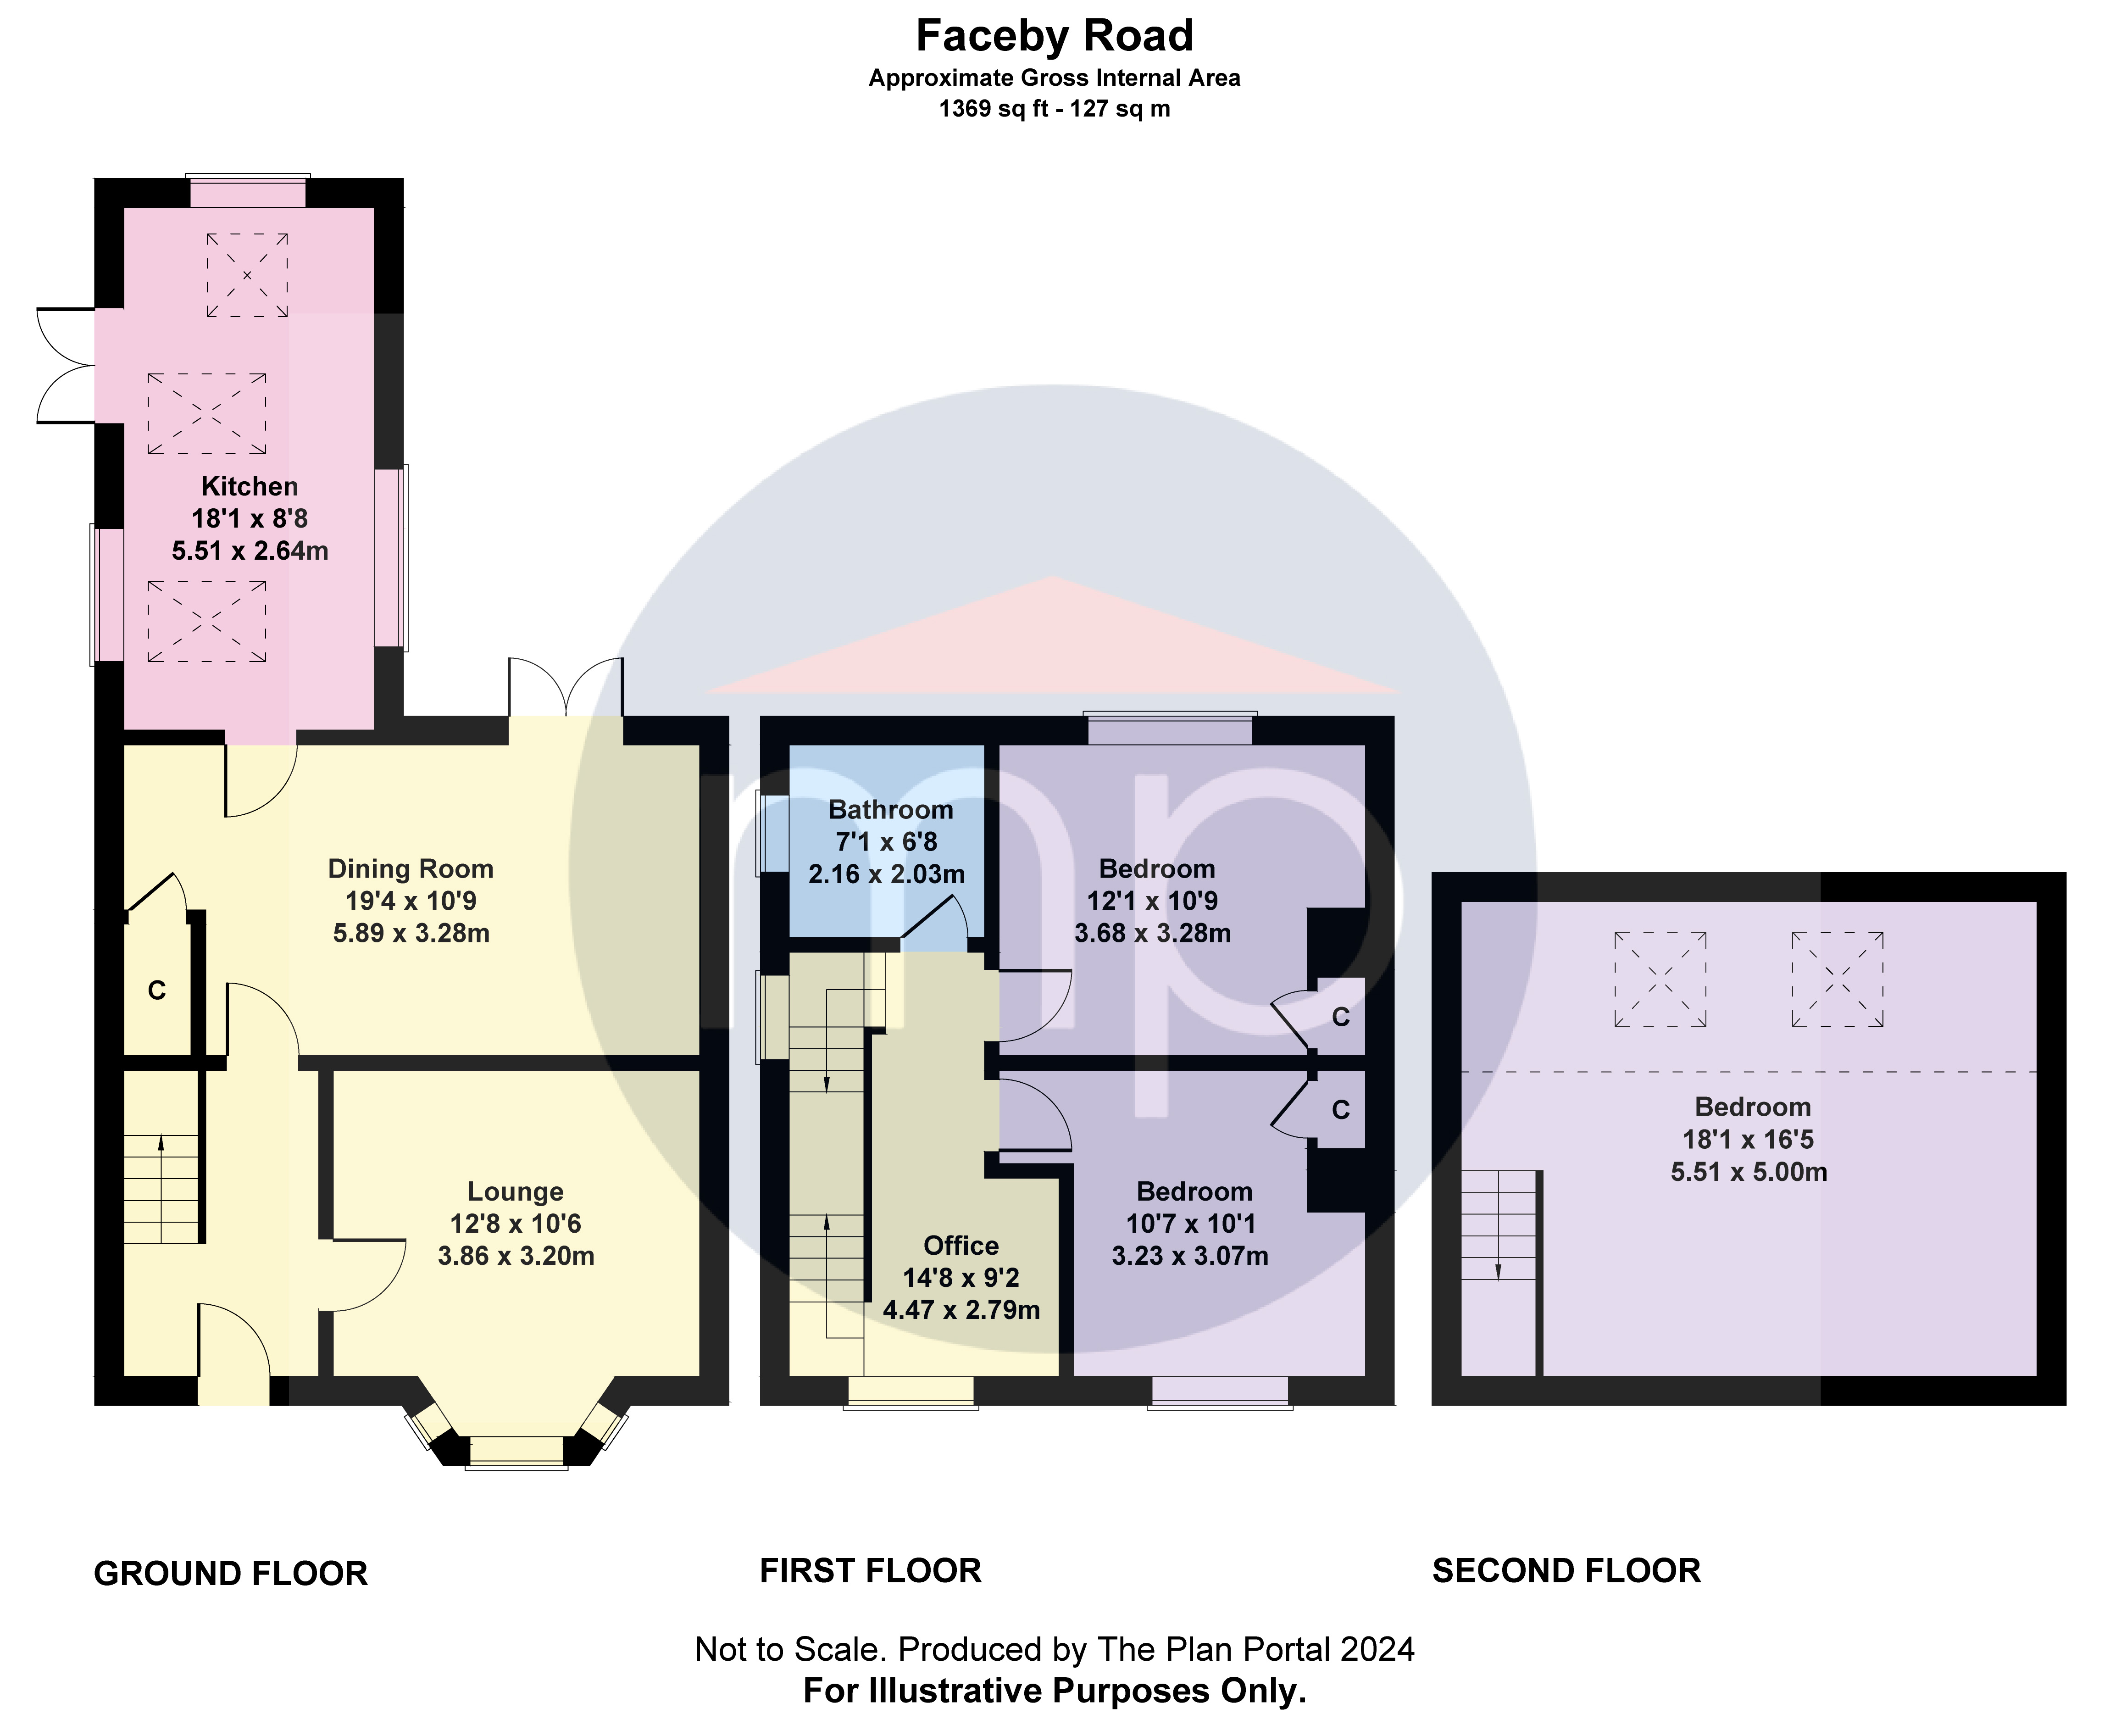 3 bed house for sale in Faceby Road, Carlton-in-Cleveland - Property floorplan